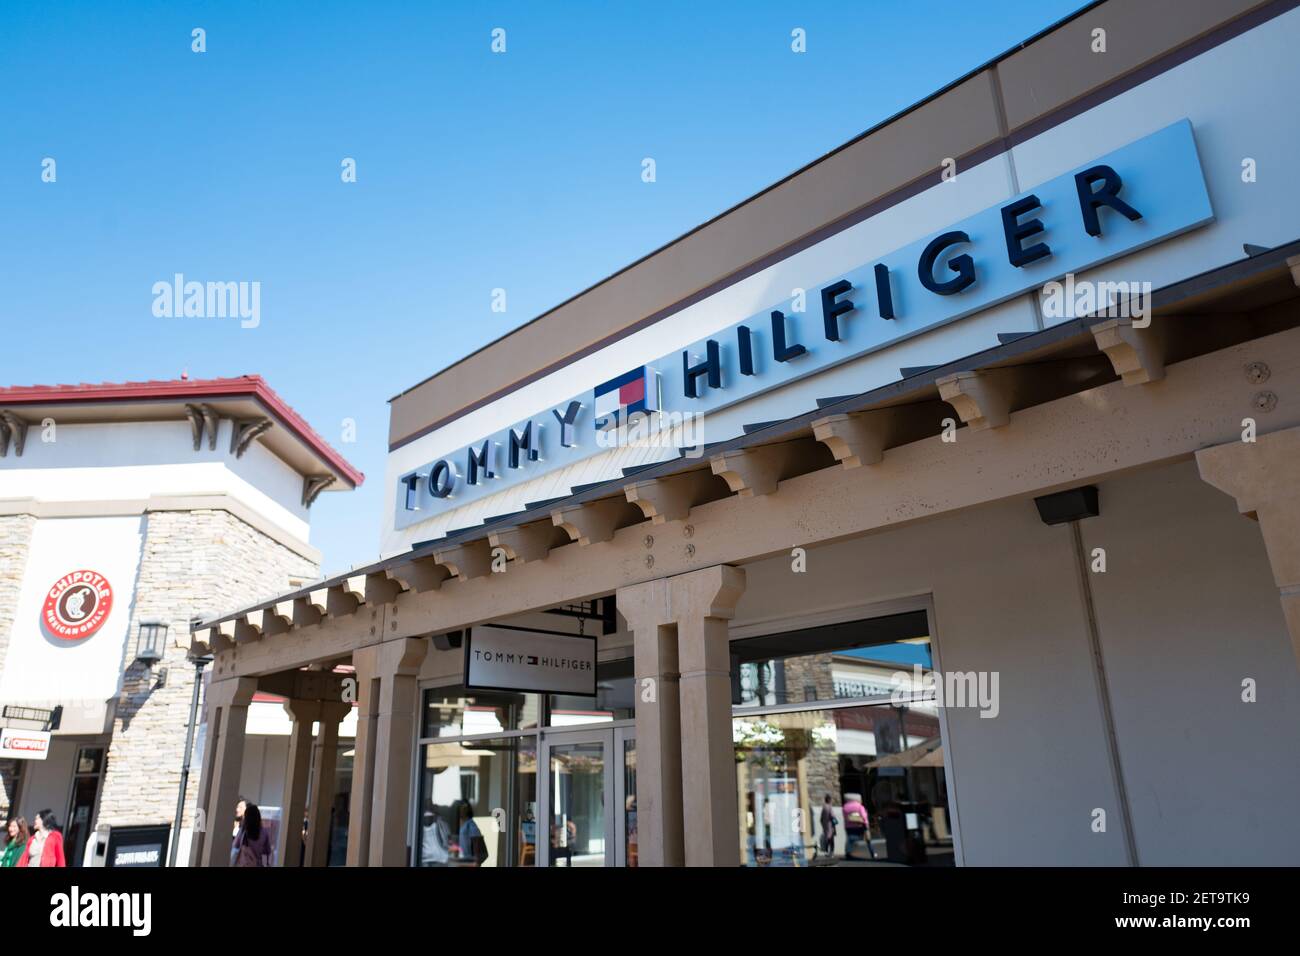 Facade with at Tommy Hilfiger outlet store in the San Francisco Premium Outlets, shopping mall in California, October 16, 2018. (Photo by Smith USA Stock Photo - Alamy